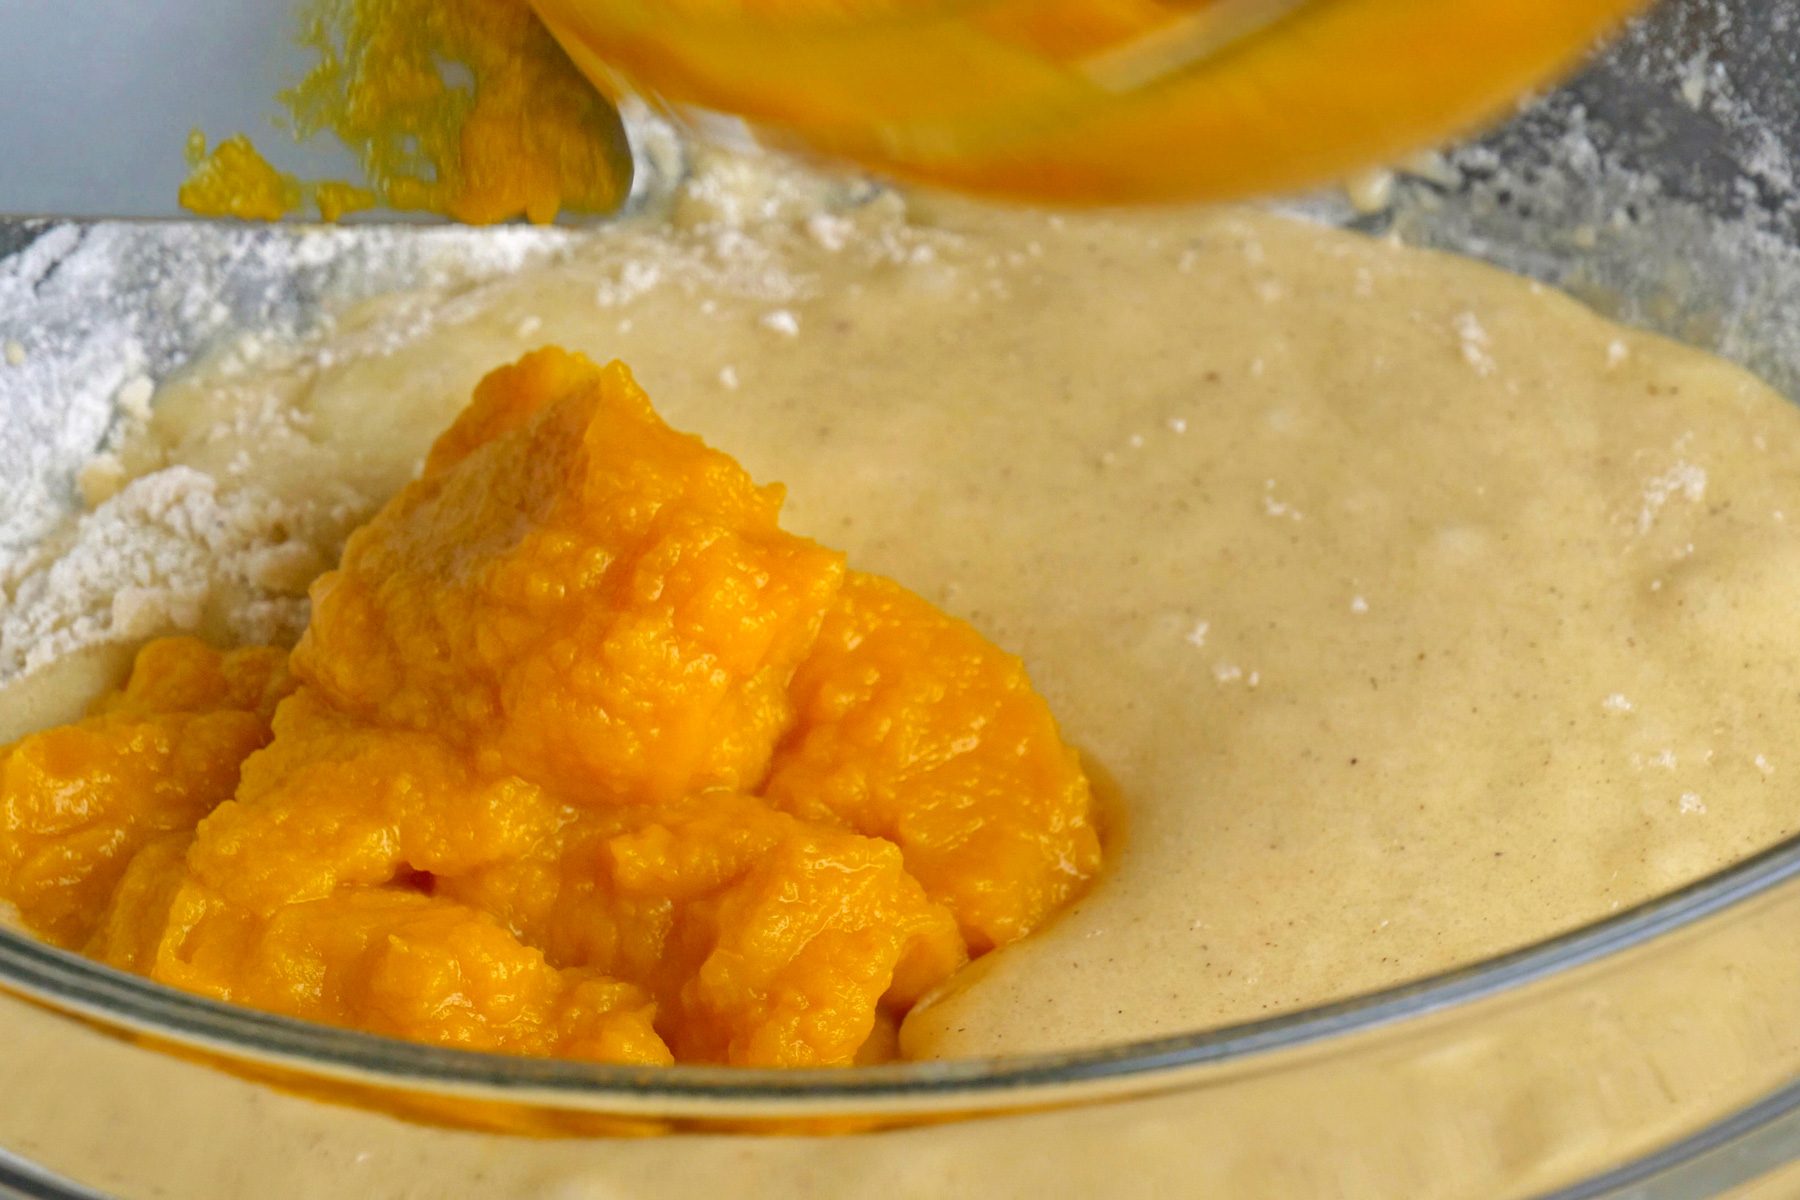 A bowl of wet mixture with canned pumpkin puree